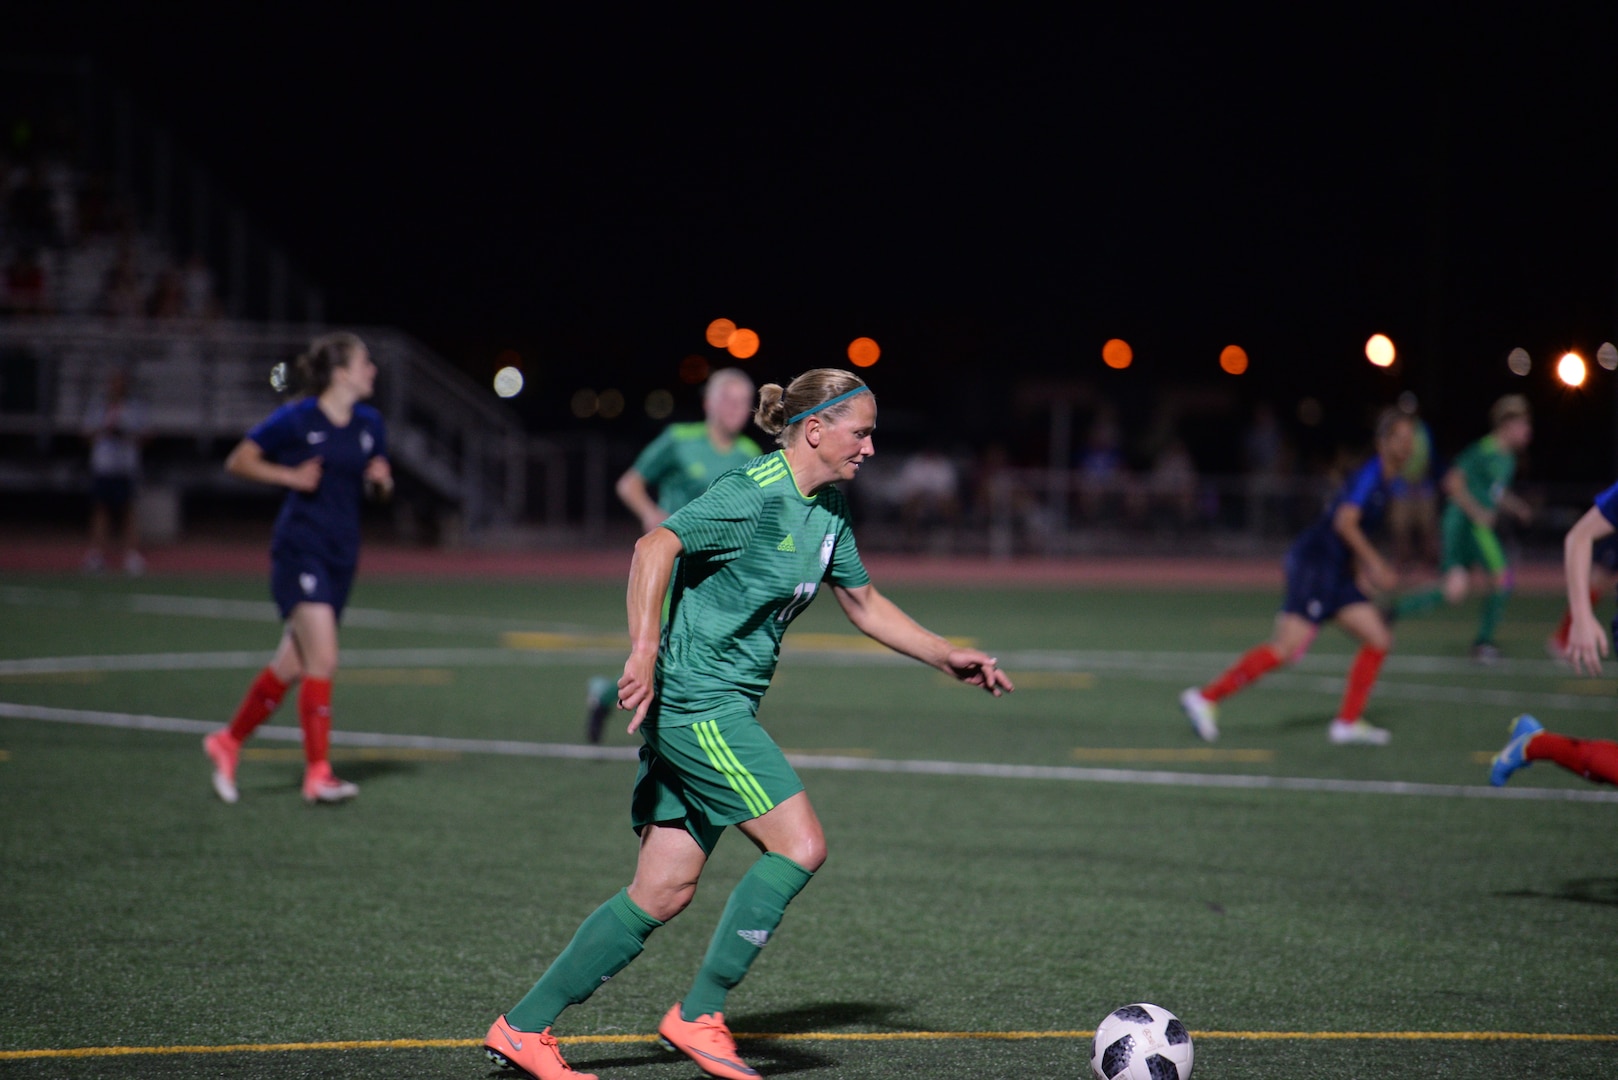 Elite women from France and Germany compete in the El Paso heat at Fort Bliss June 23, at the 2018 Conseil International du Sport Militaire (CISM) World Military Women’s Football Championship. International military teams squared off to eventually crown the best women soccer players among the international militaries participating